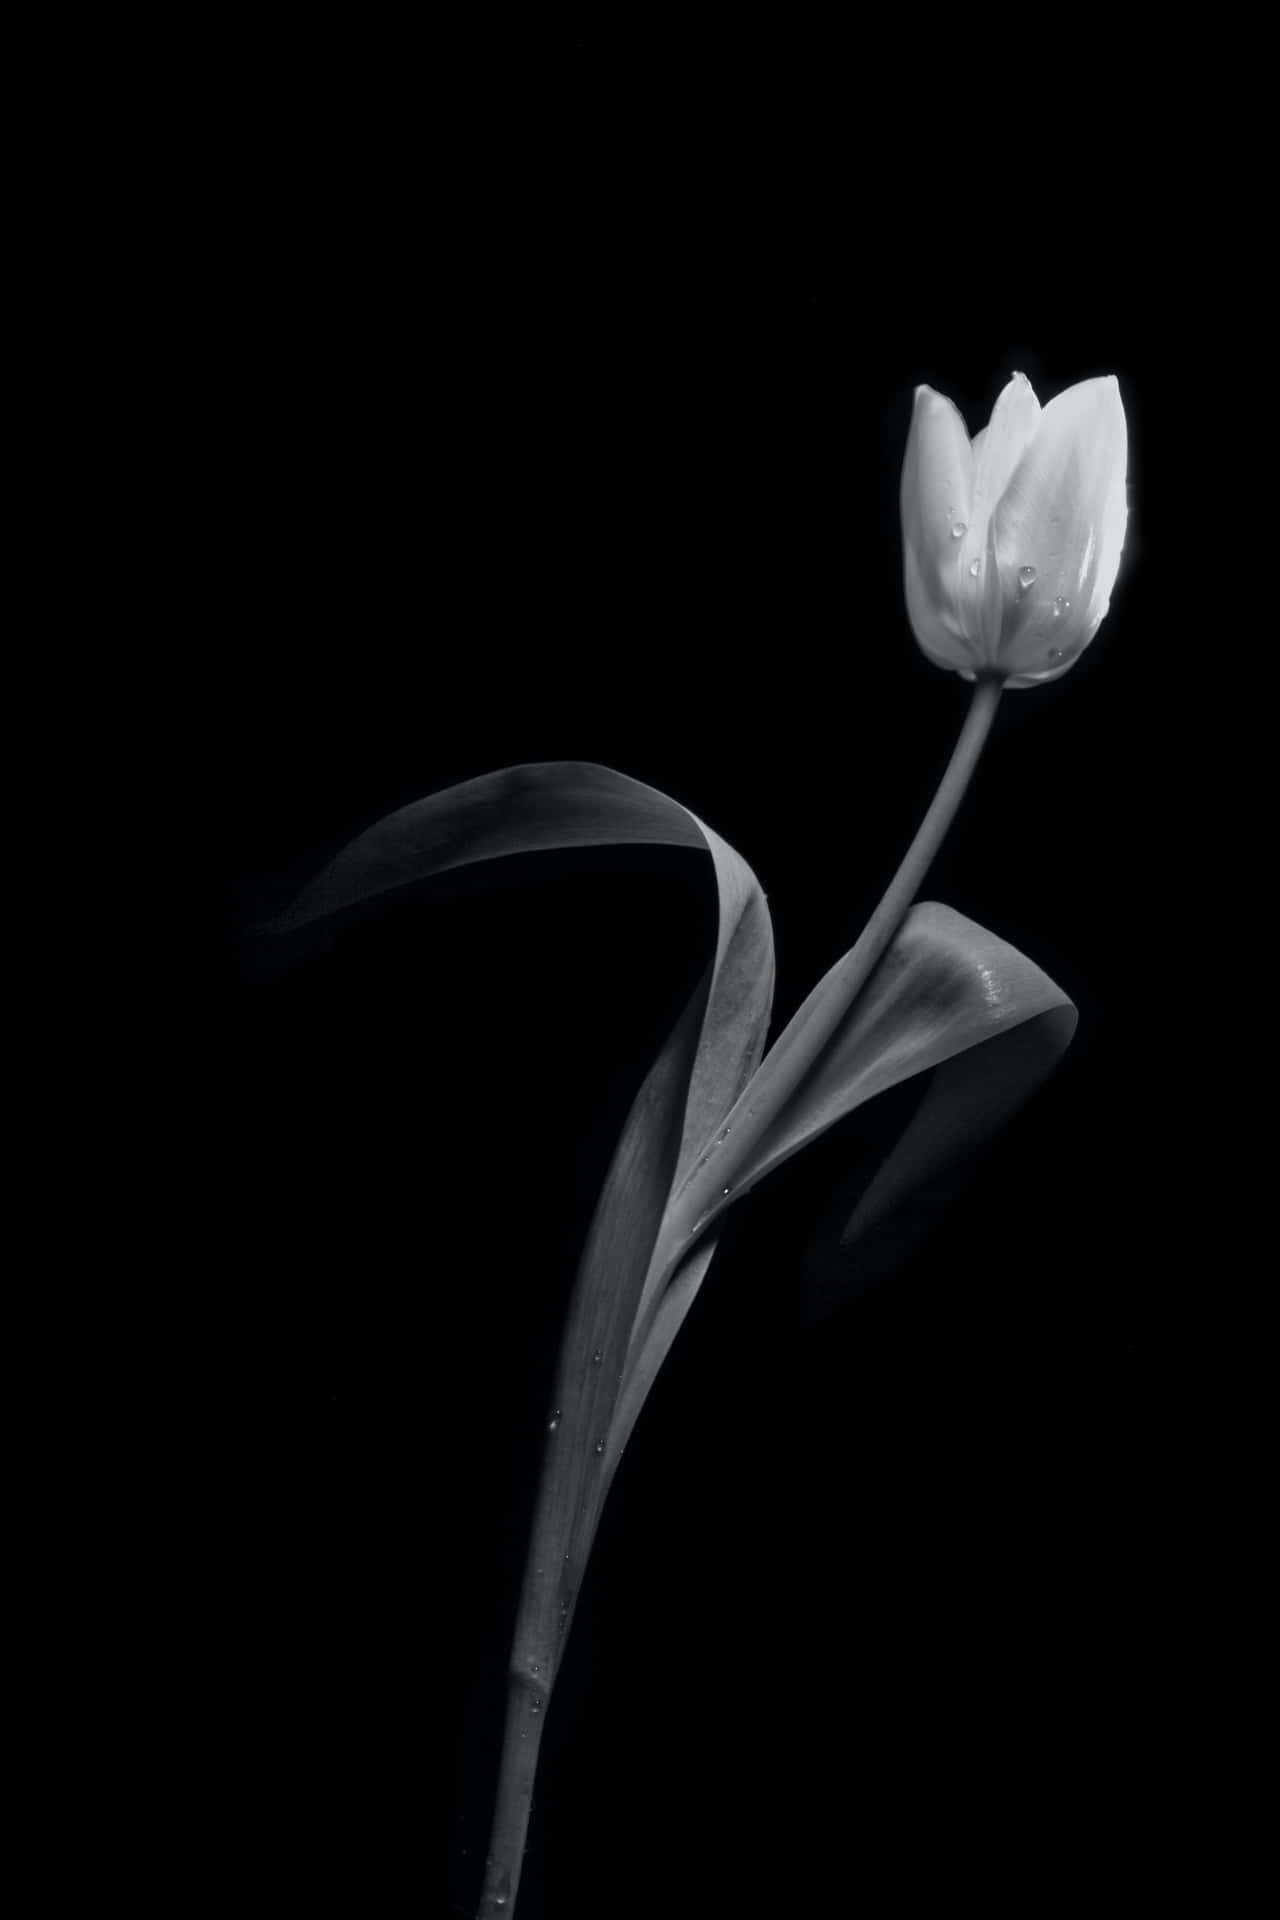 Black and White Flower - An Elegant Contrast of Beauty